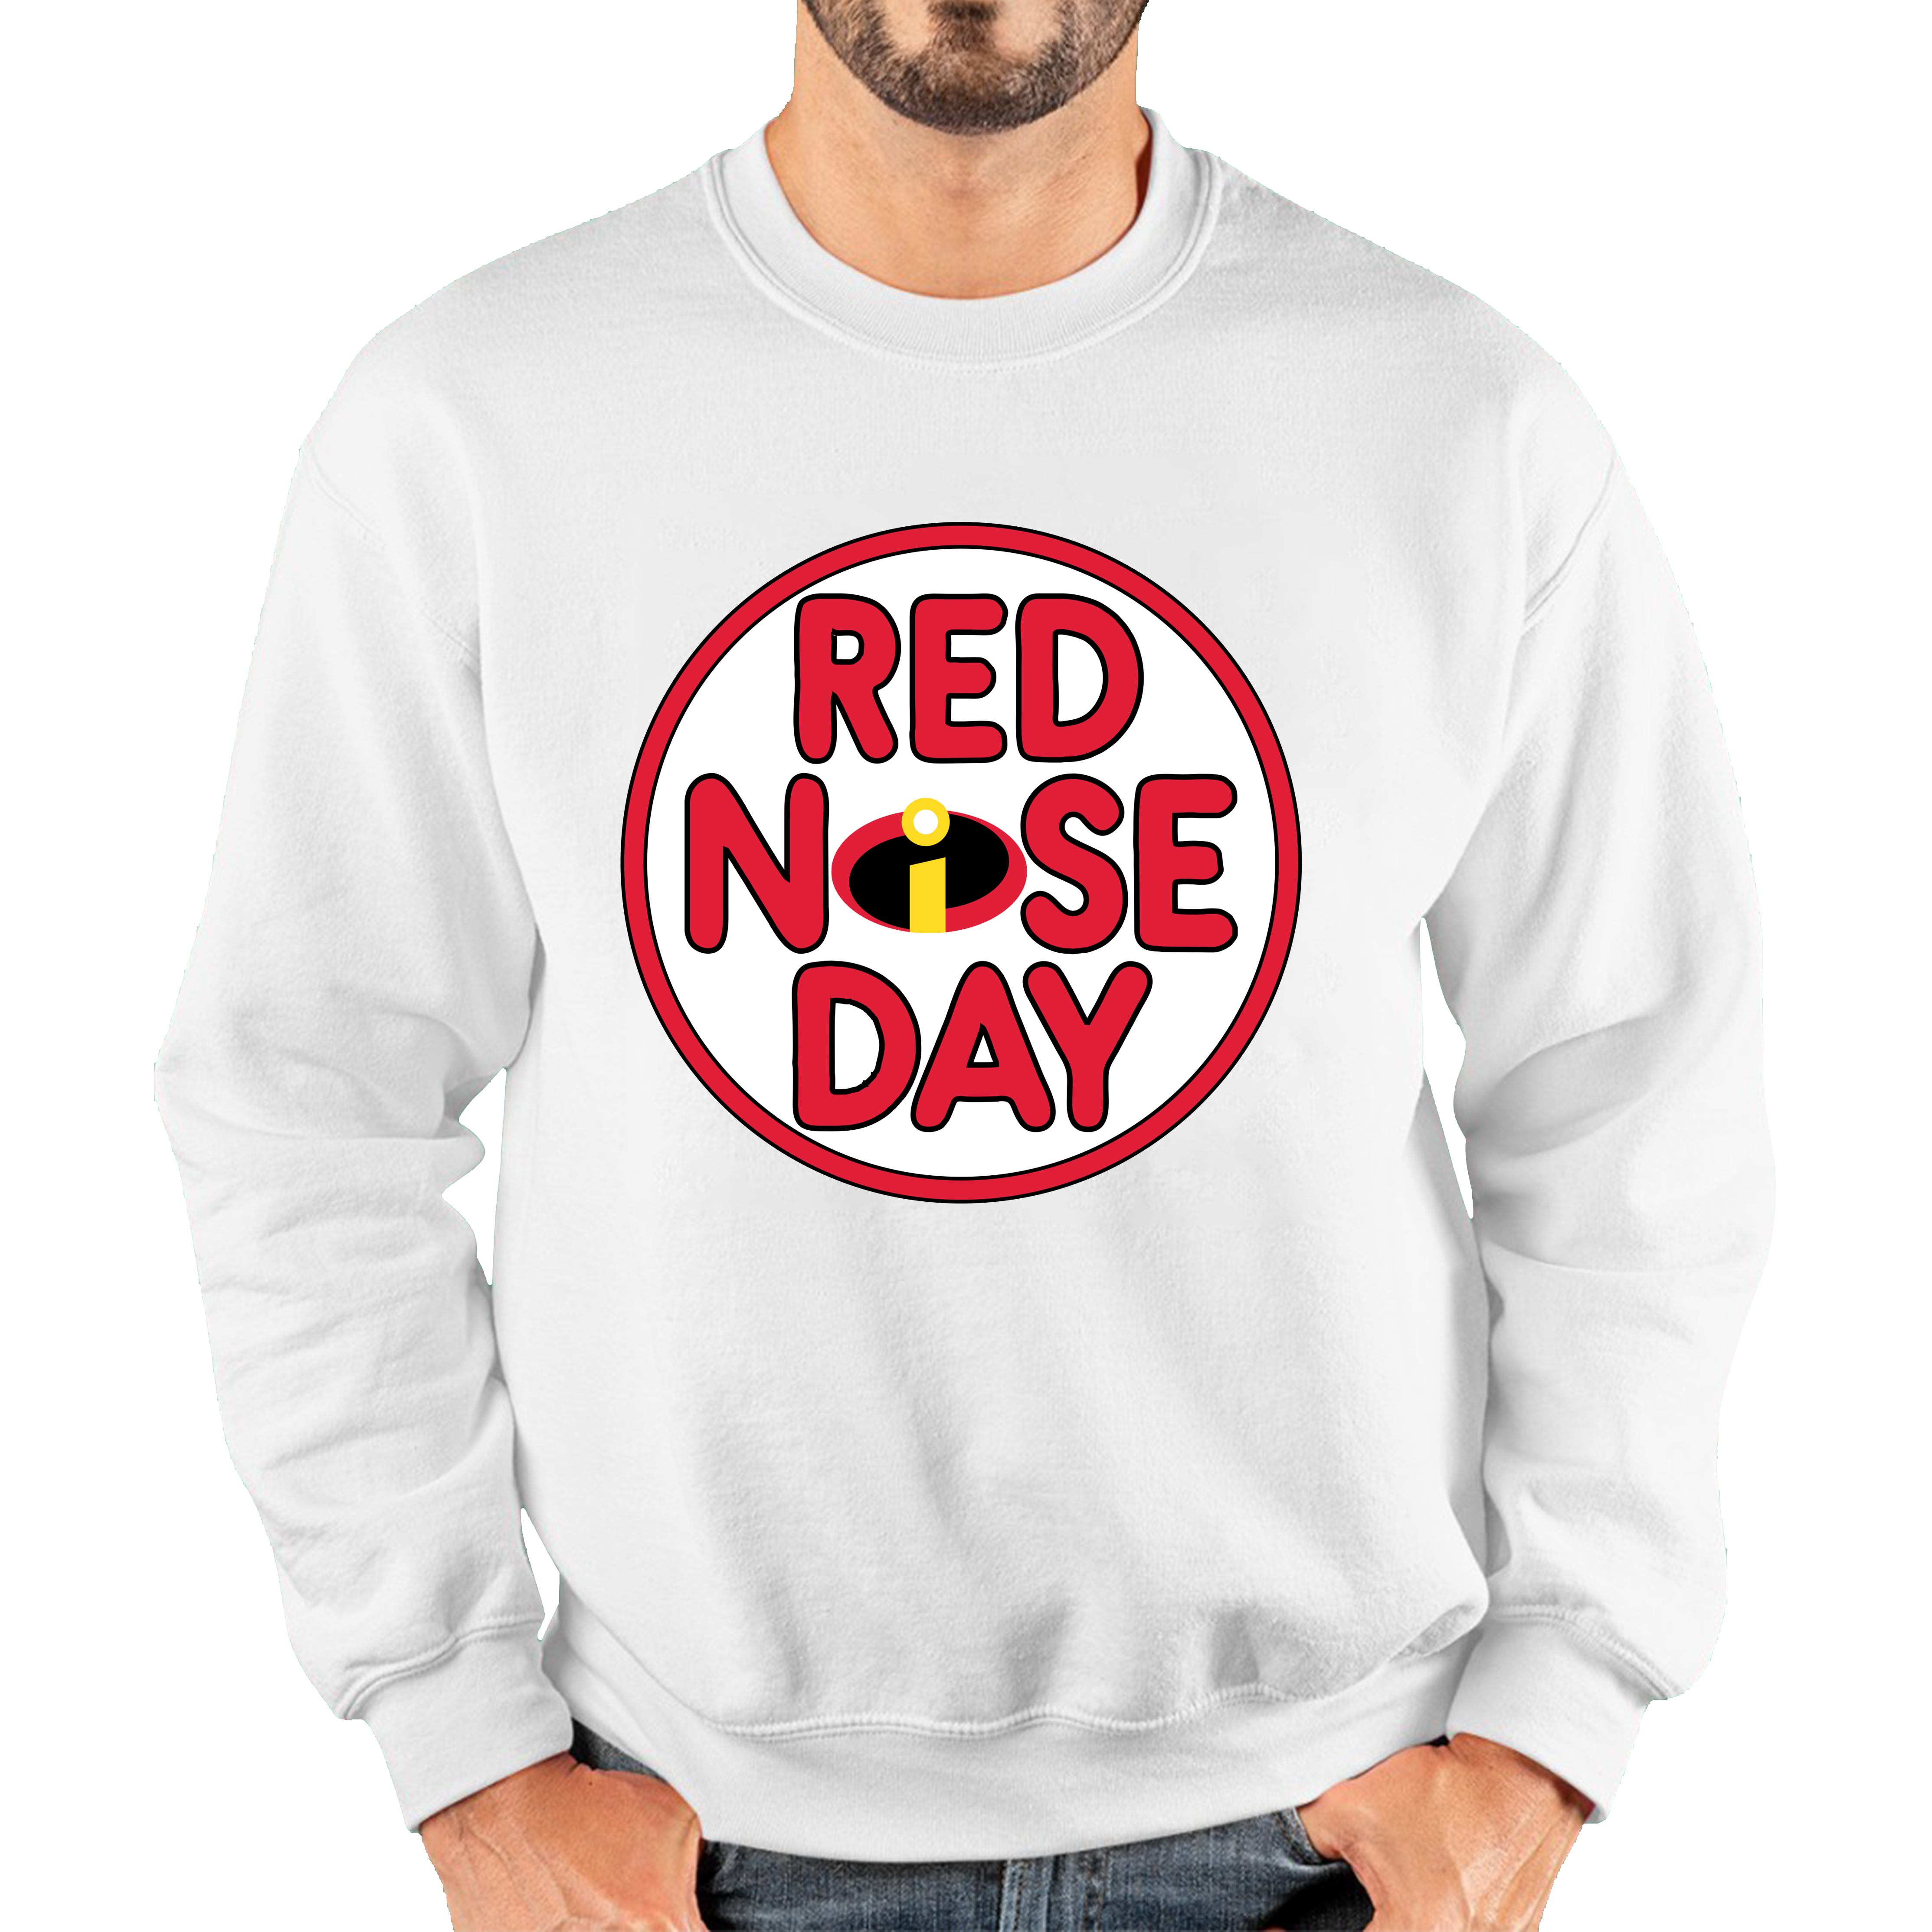 Disney The Incredibles Red Nose Day Adult Sweatshirt. 50% Goes To Charity